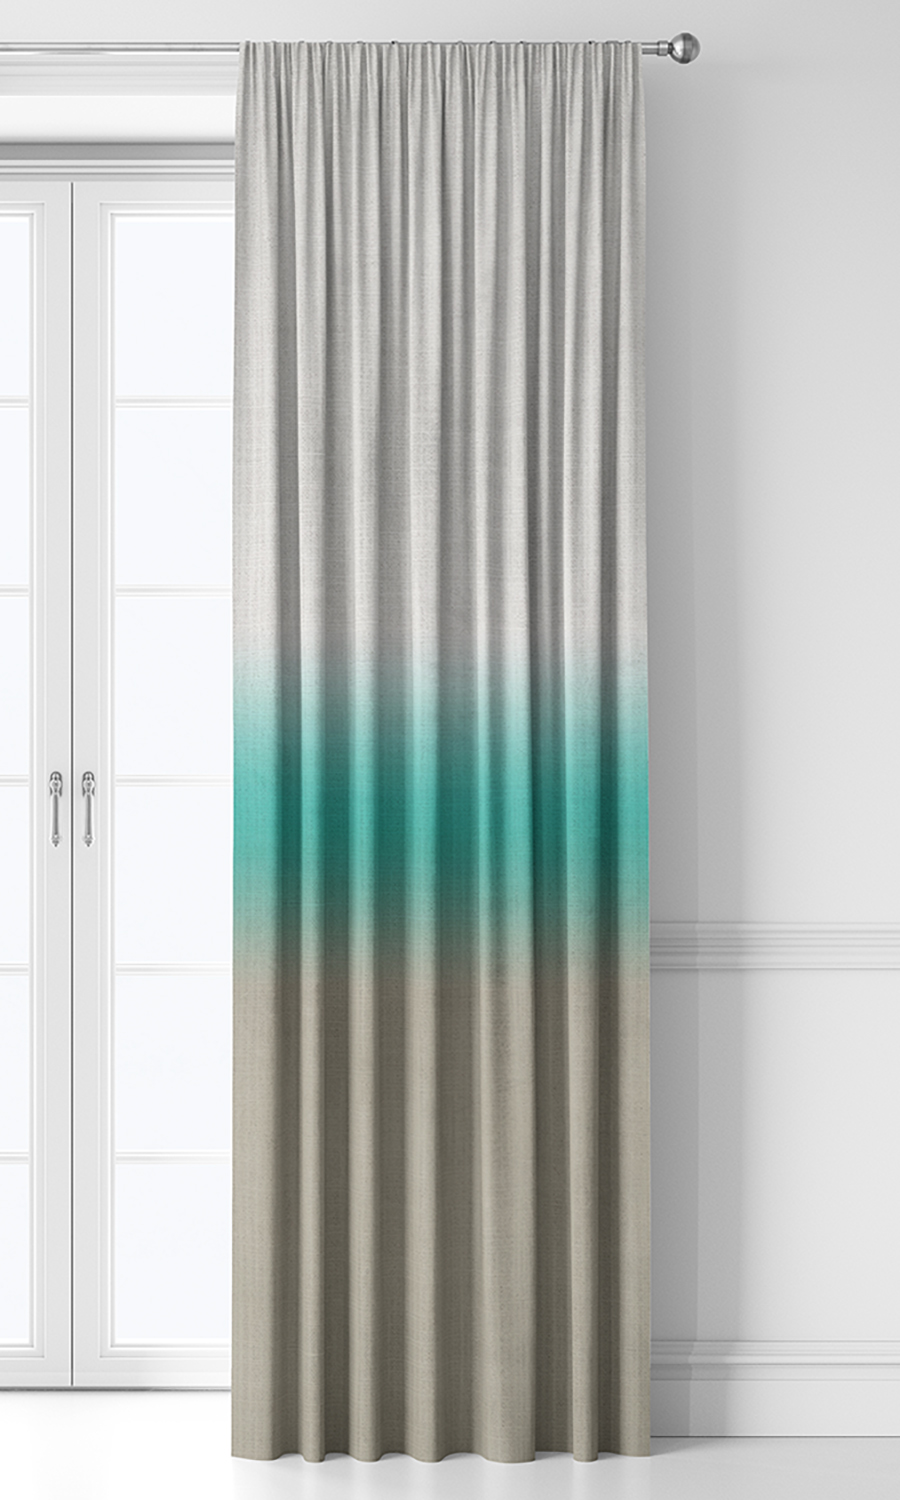 Marble Falls' 3-Tone Ombre Curtains (Turquoise Blue/ Beige) – Spiffy Spools